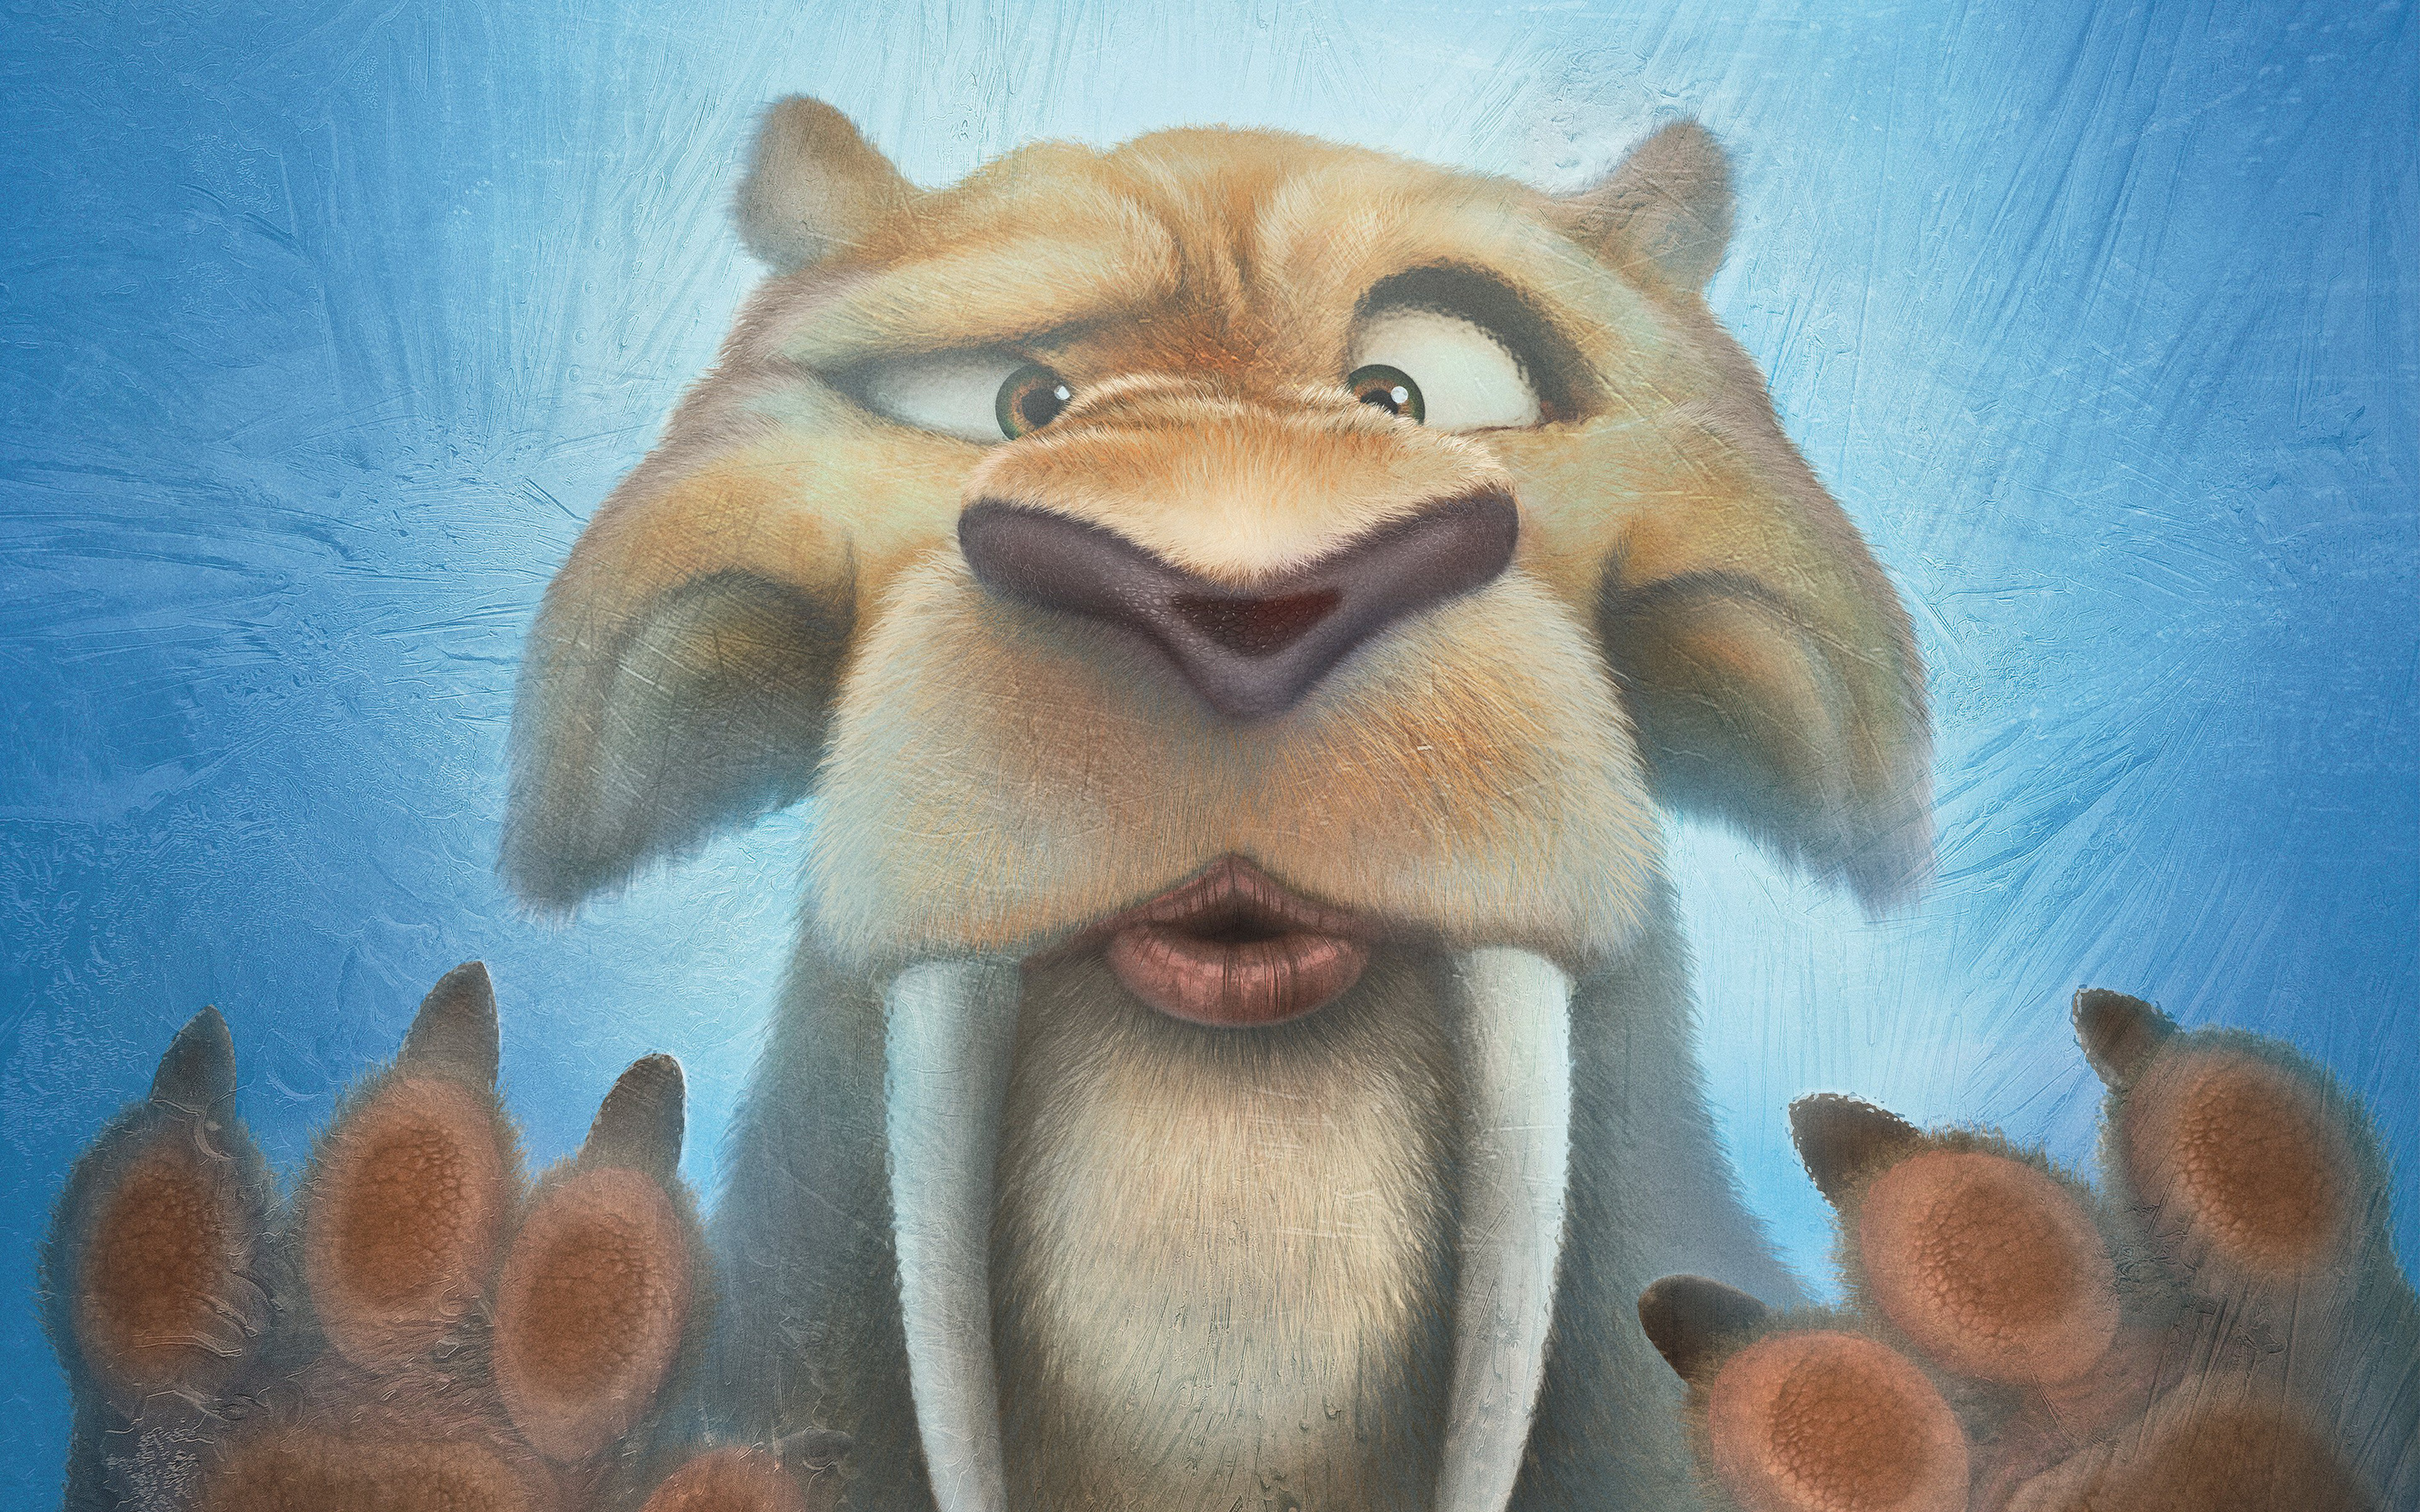 Ice Age franchise, Diego wallpapers, HD wallpapers and backgrounds, WallHere collection, 2880x1800 HD Desktop